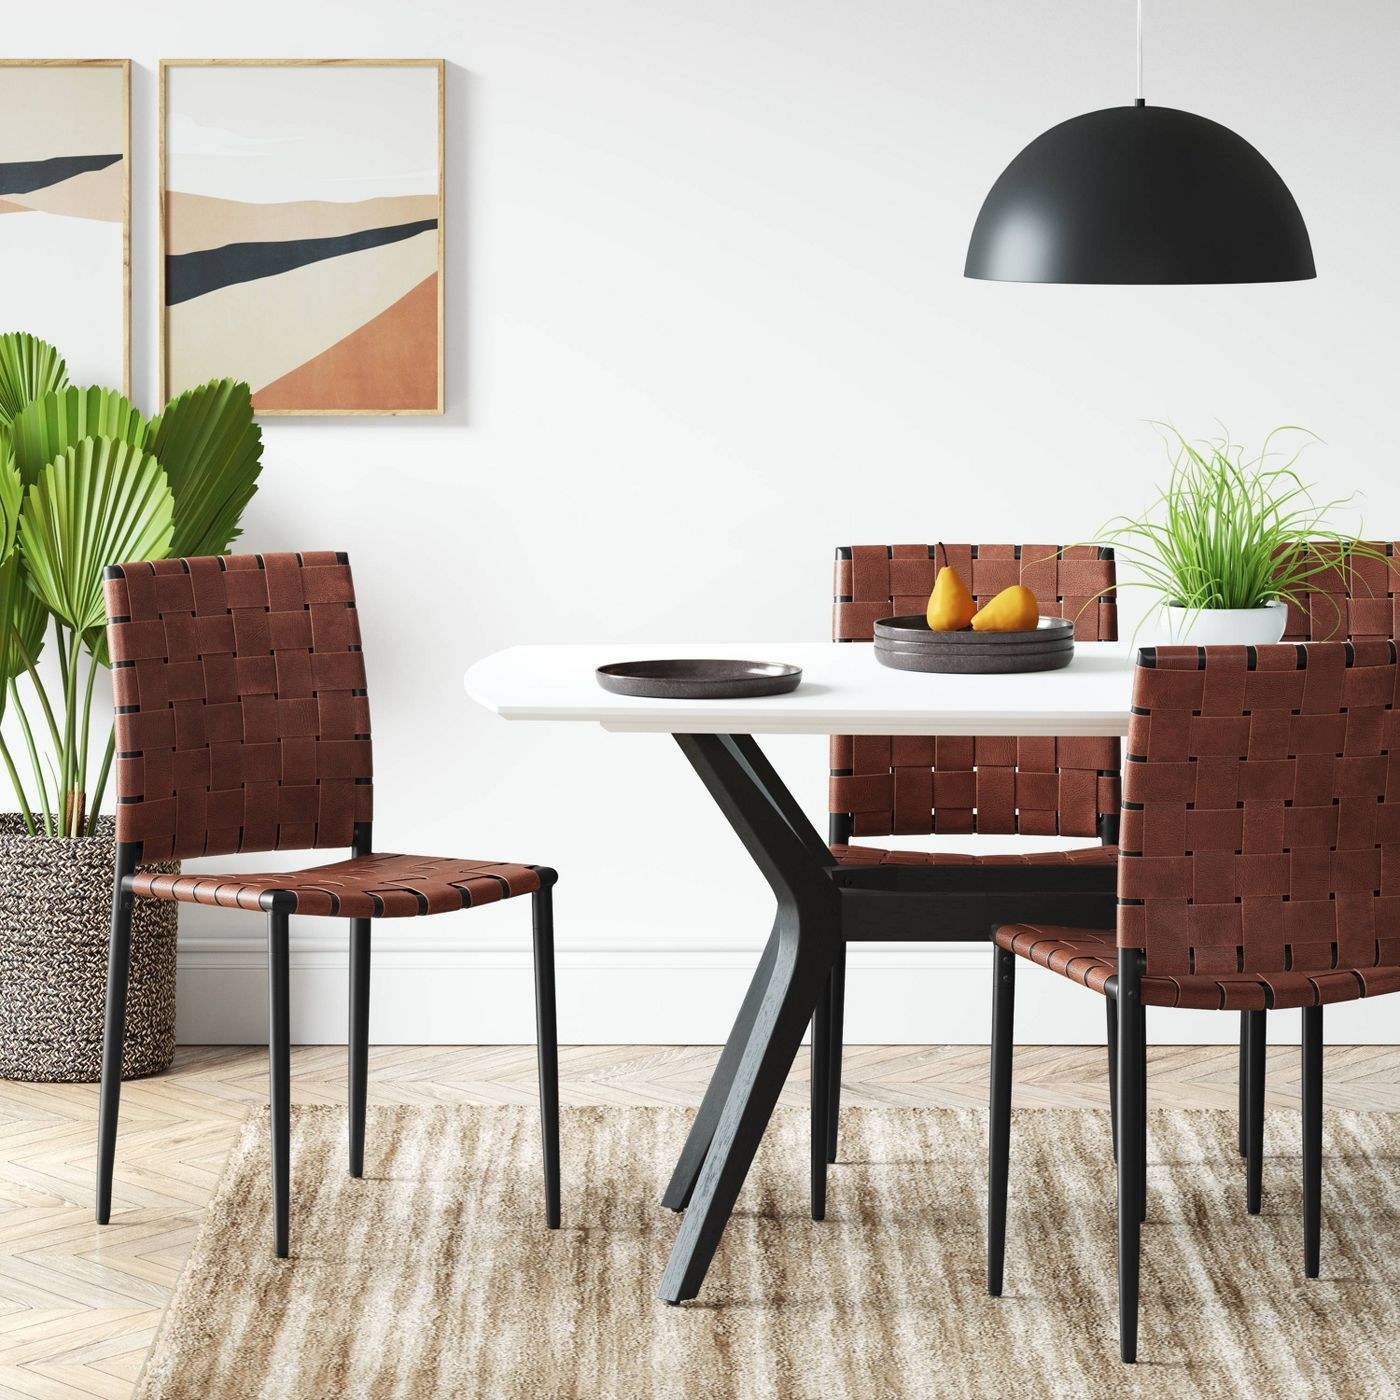 Chairs with black metal frame and brown leather seat and back